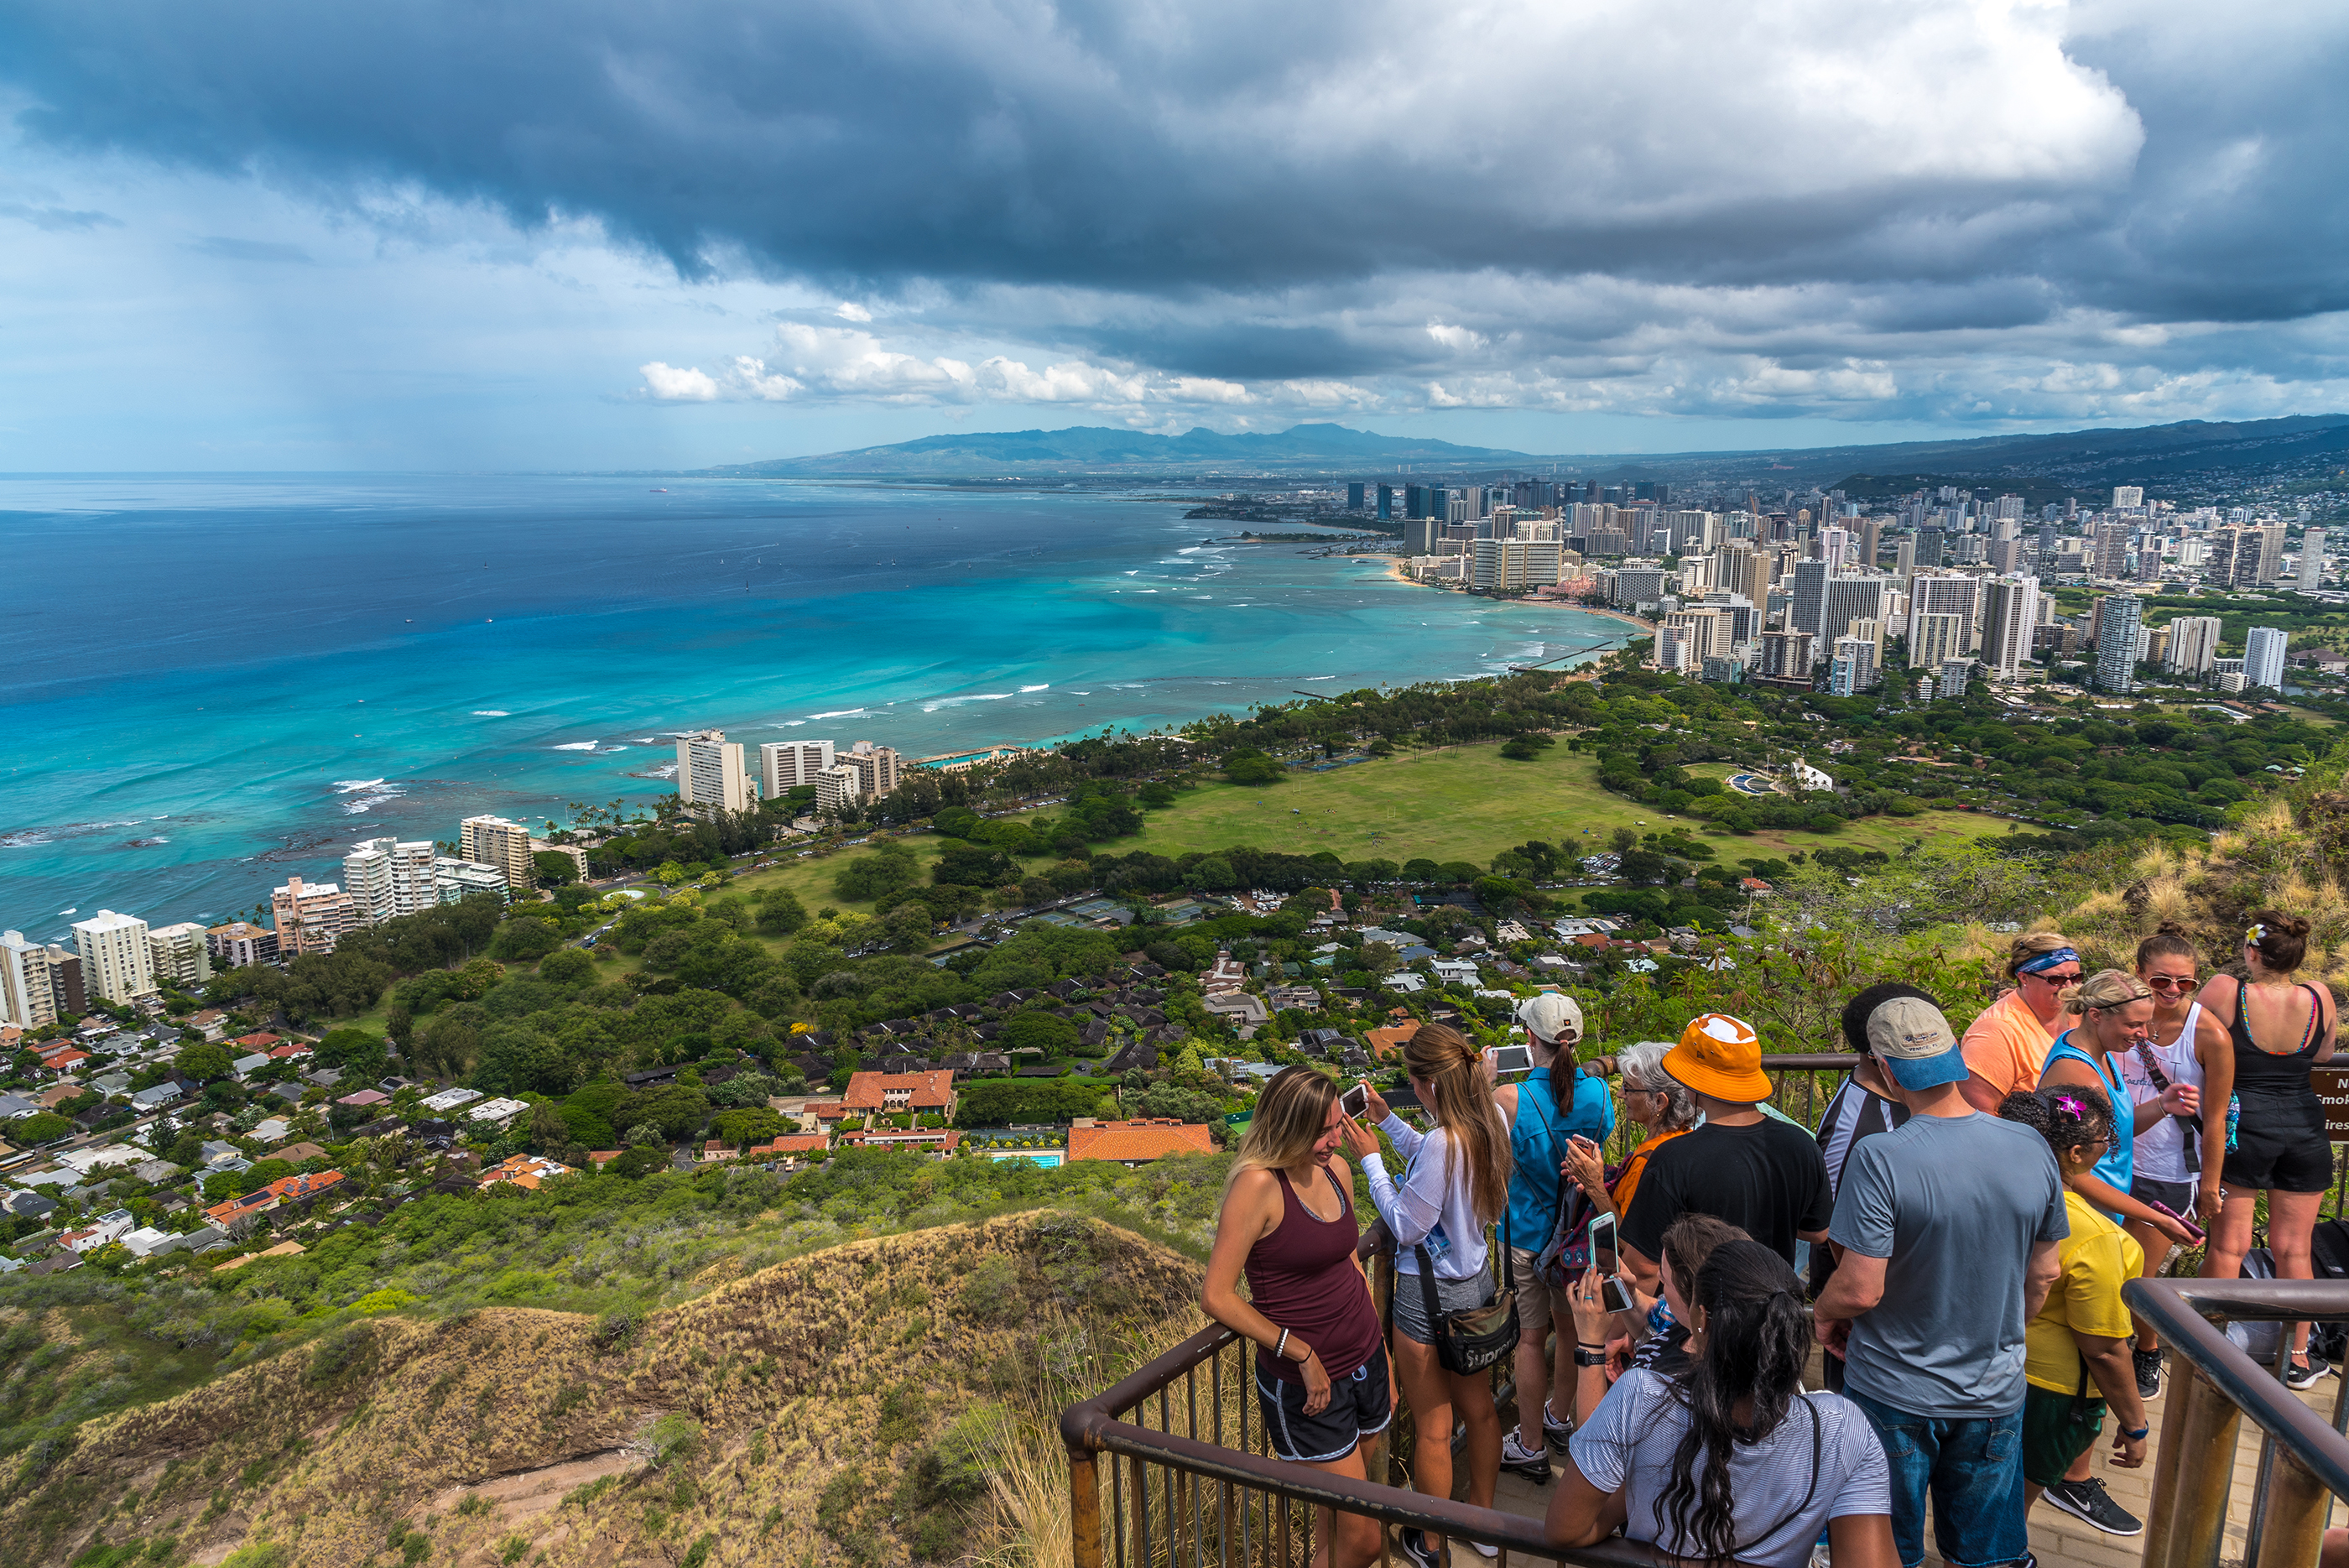 Agroup of tourists take selfies and photos of Waikiki and greater Honolulu from the top of the Diamond Head crater landmark.